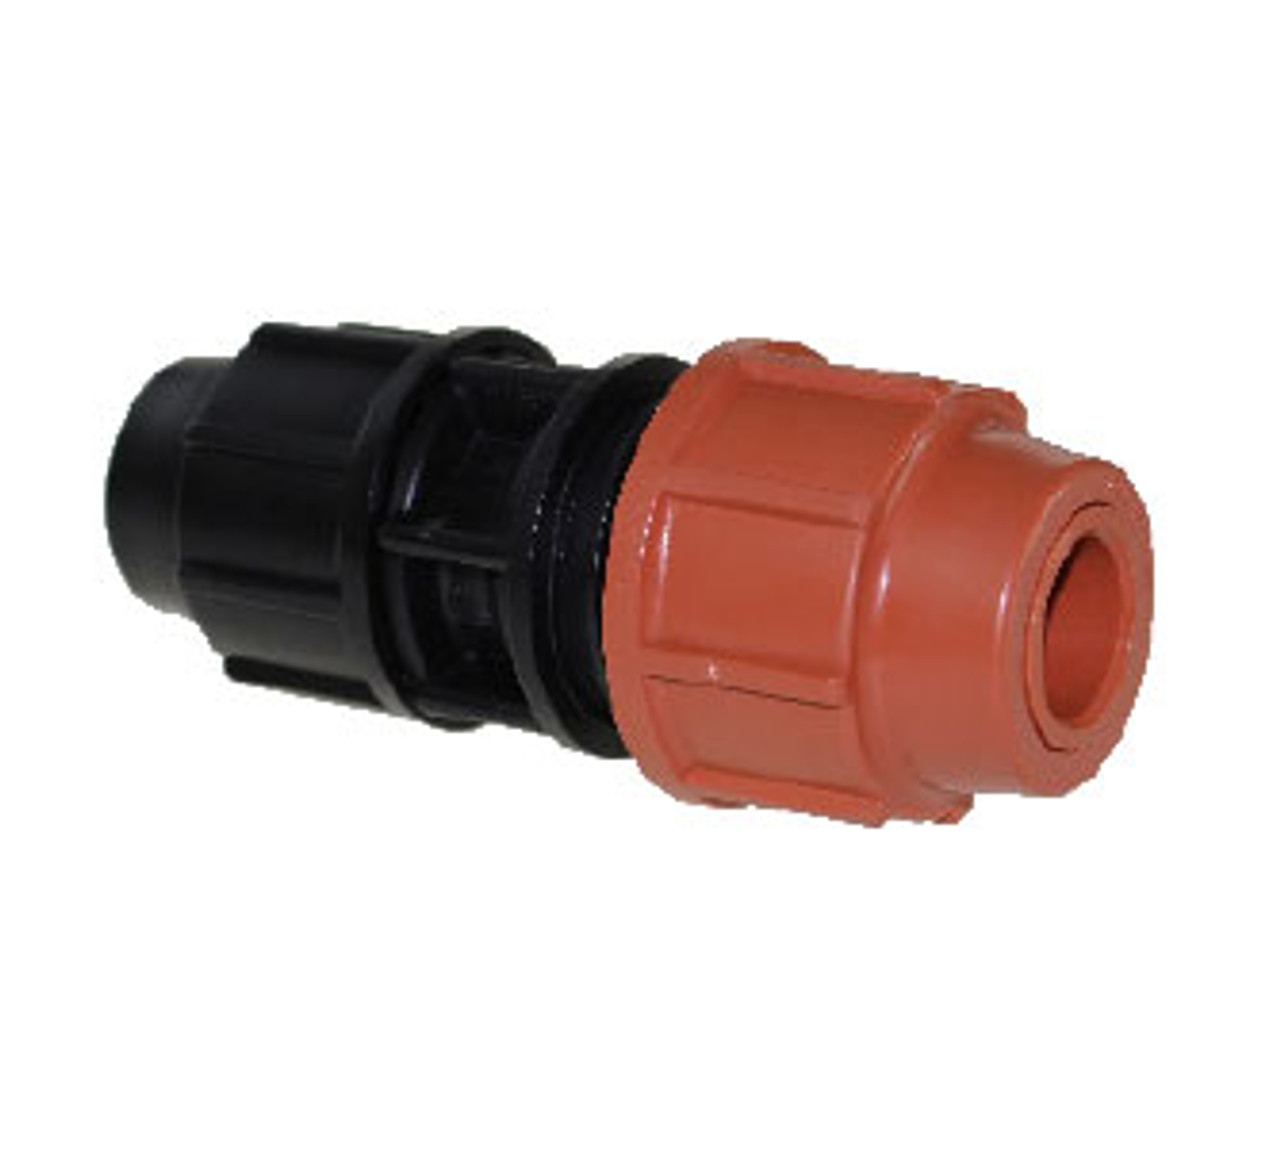 UltraAir Metric Compression Connector - Poly to Copper 20 x 20